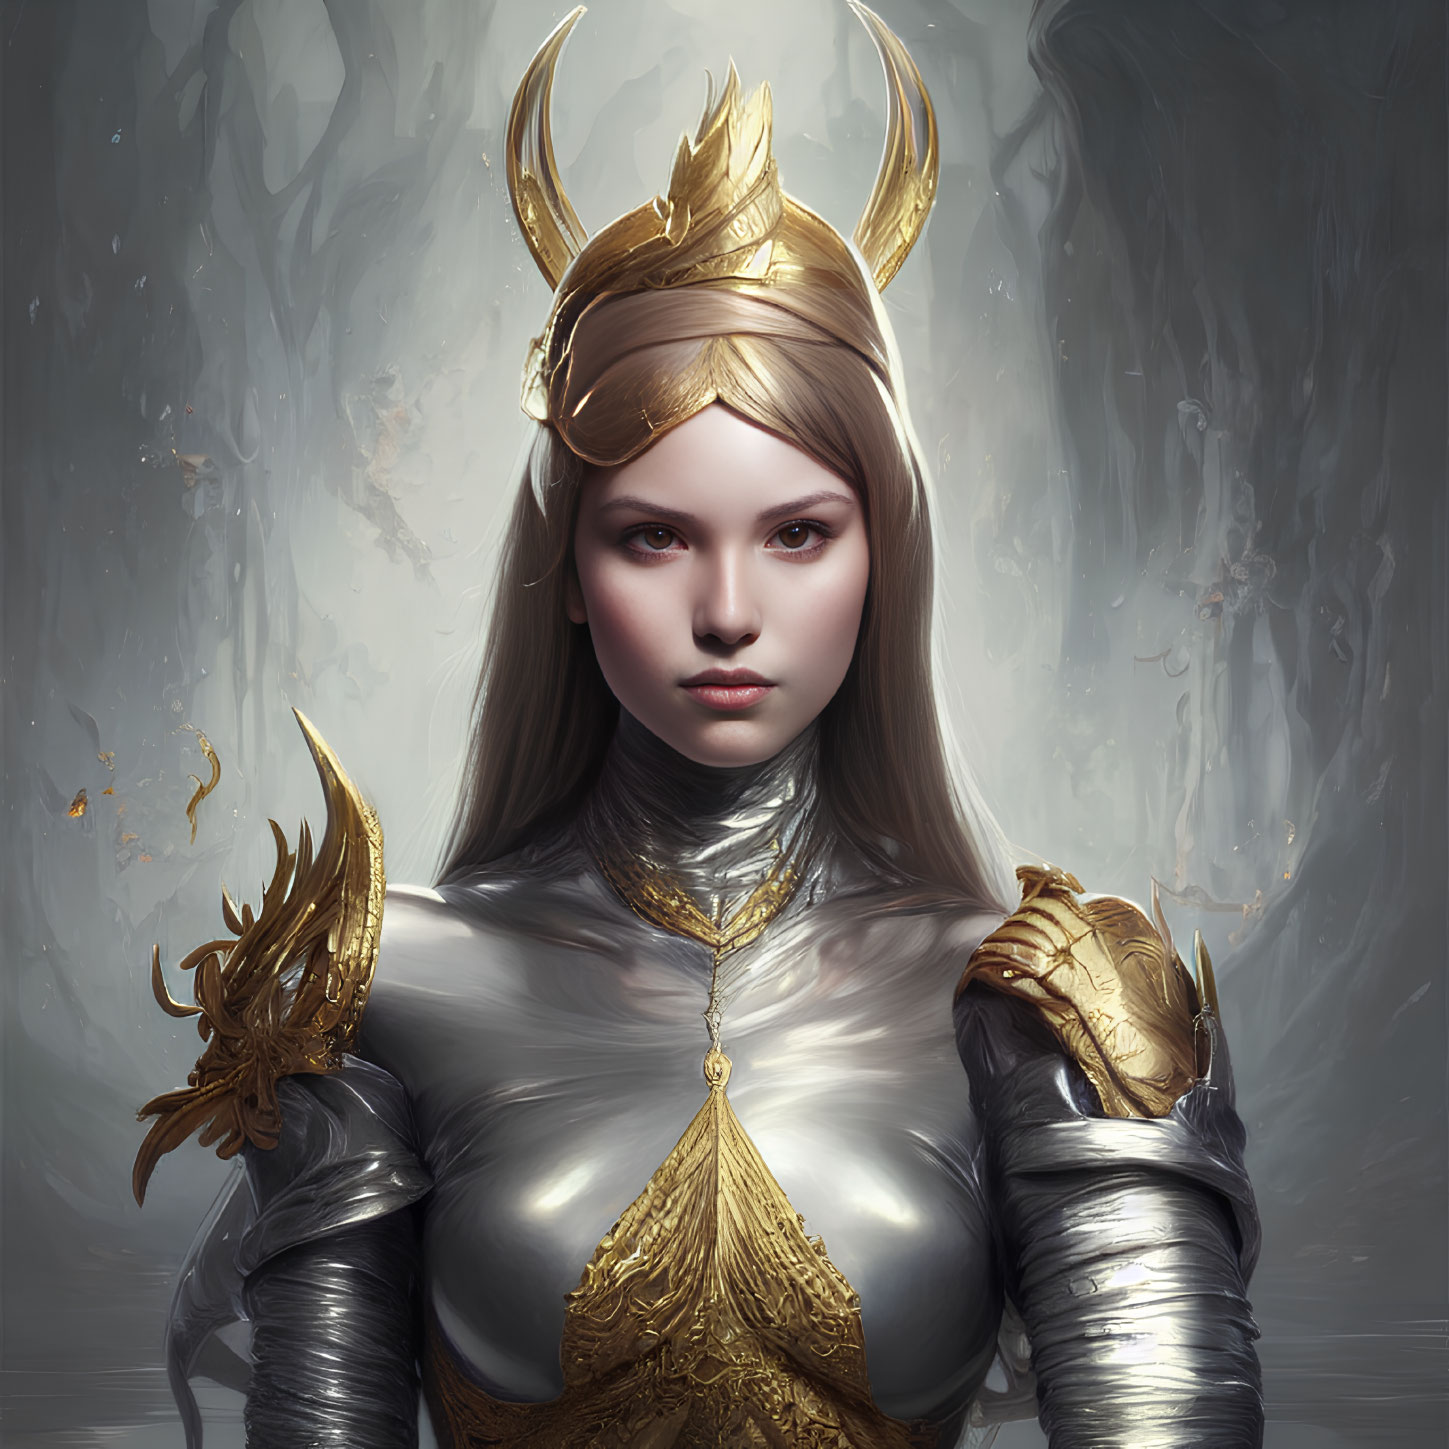 Regal woman in golden and silver armor with crowned helmet exudes nobility.